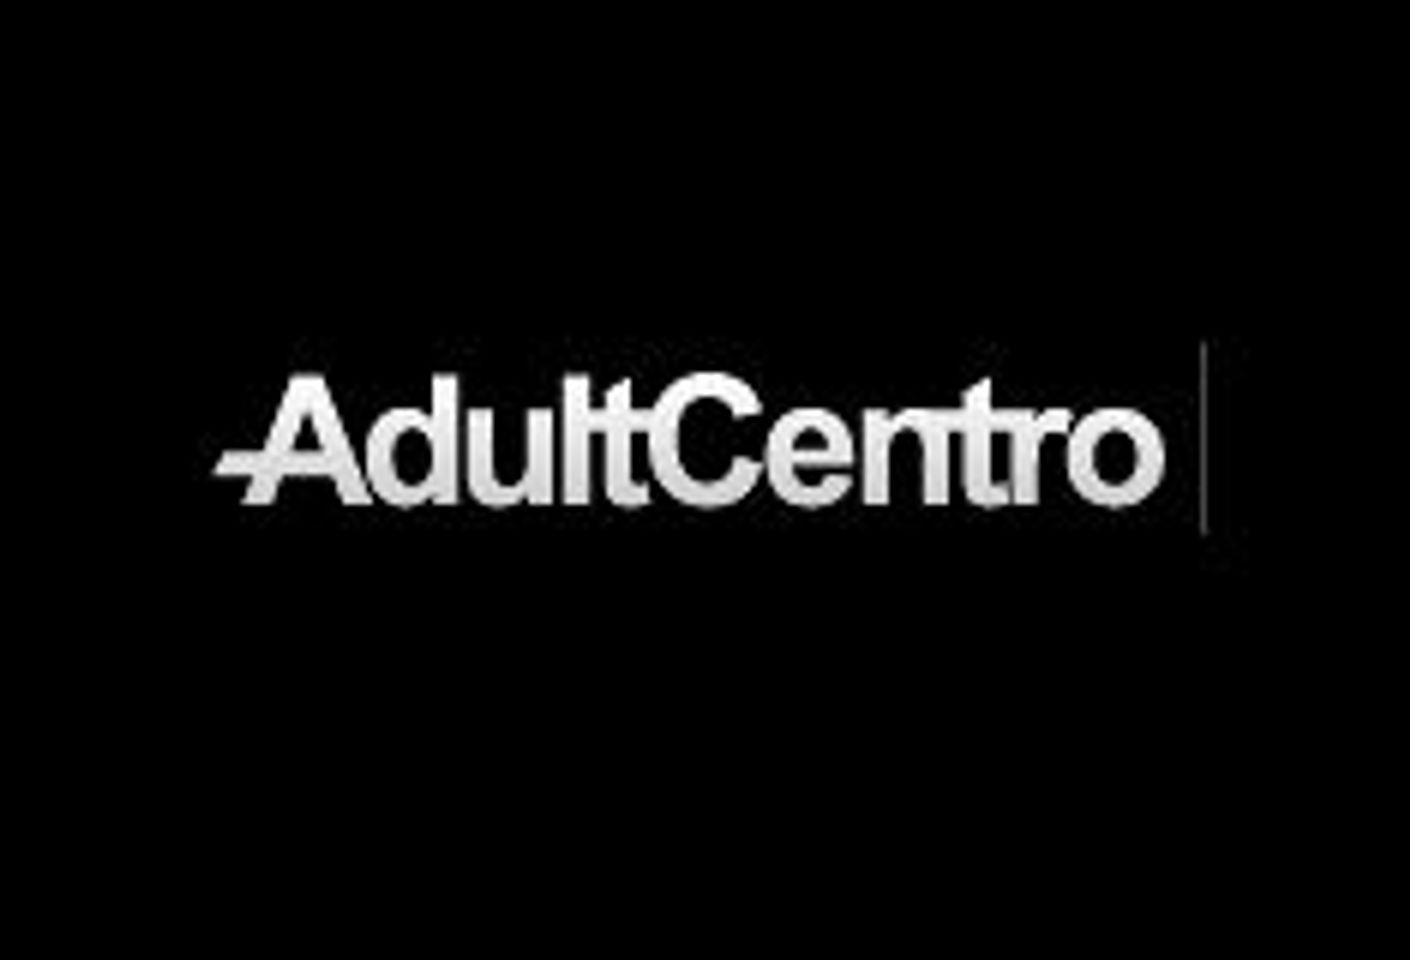 AdultCentro Goes Big At January Events